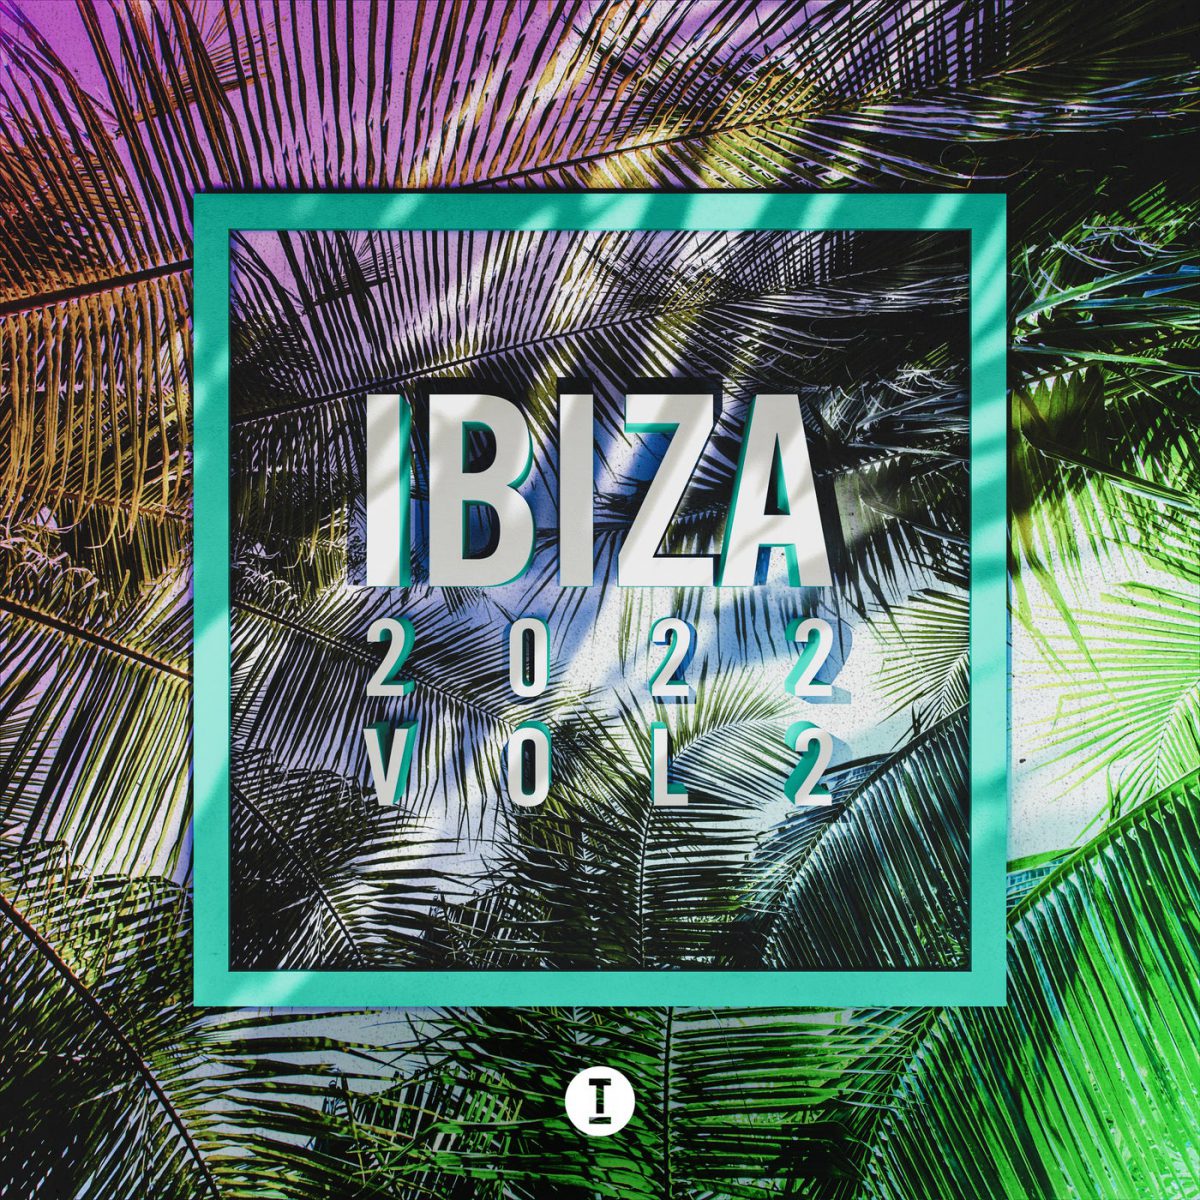 Toolroom Drops Second Heater-Filled Ibiza Compilation of the Summer ...